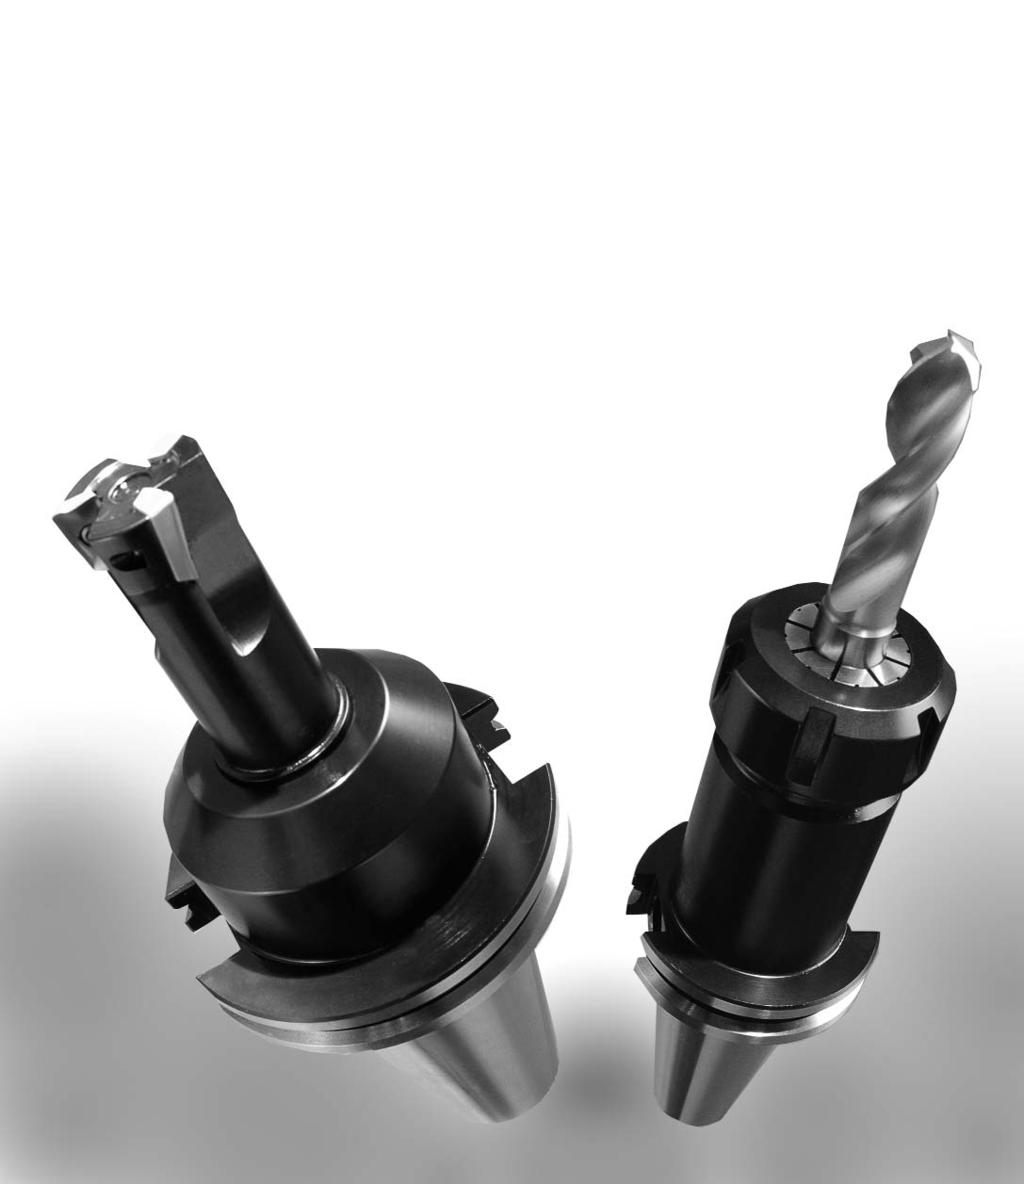 riney V 45 FLNGE V 45 Flange Toolholders are available upon request in these styles: EN MILL PTERS MORSE TPER PTERS JOS TPER